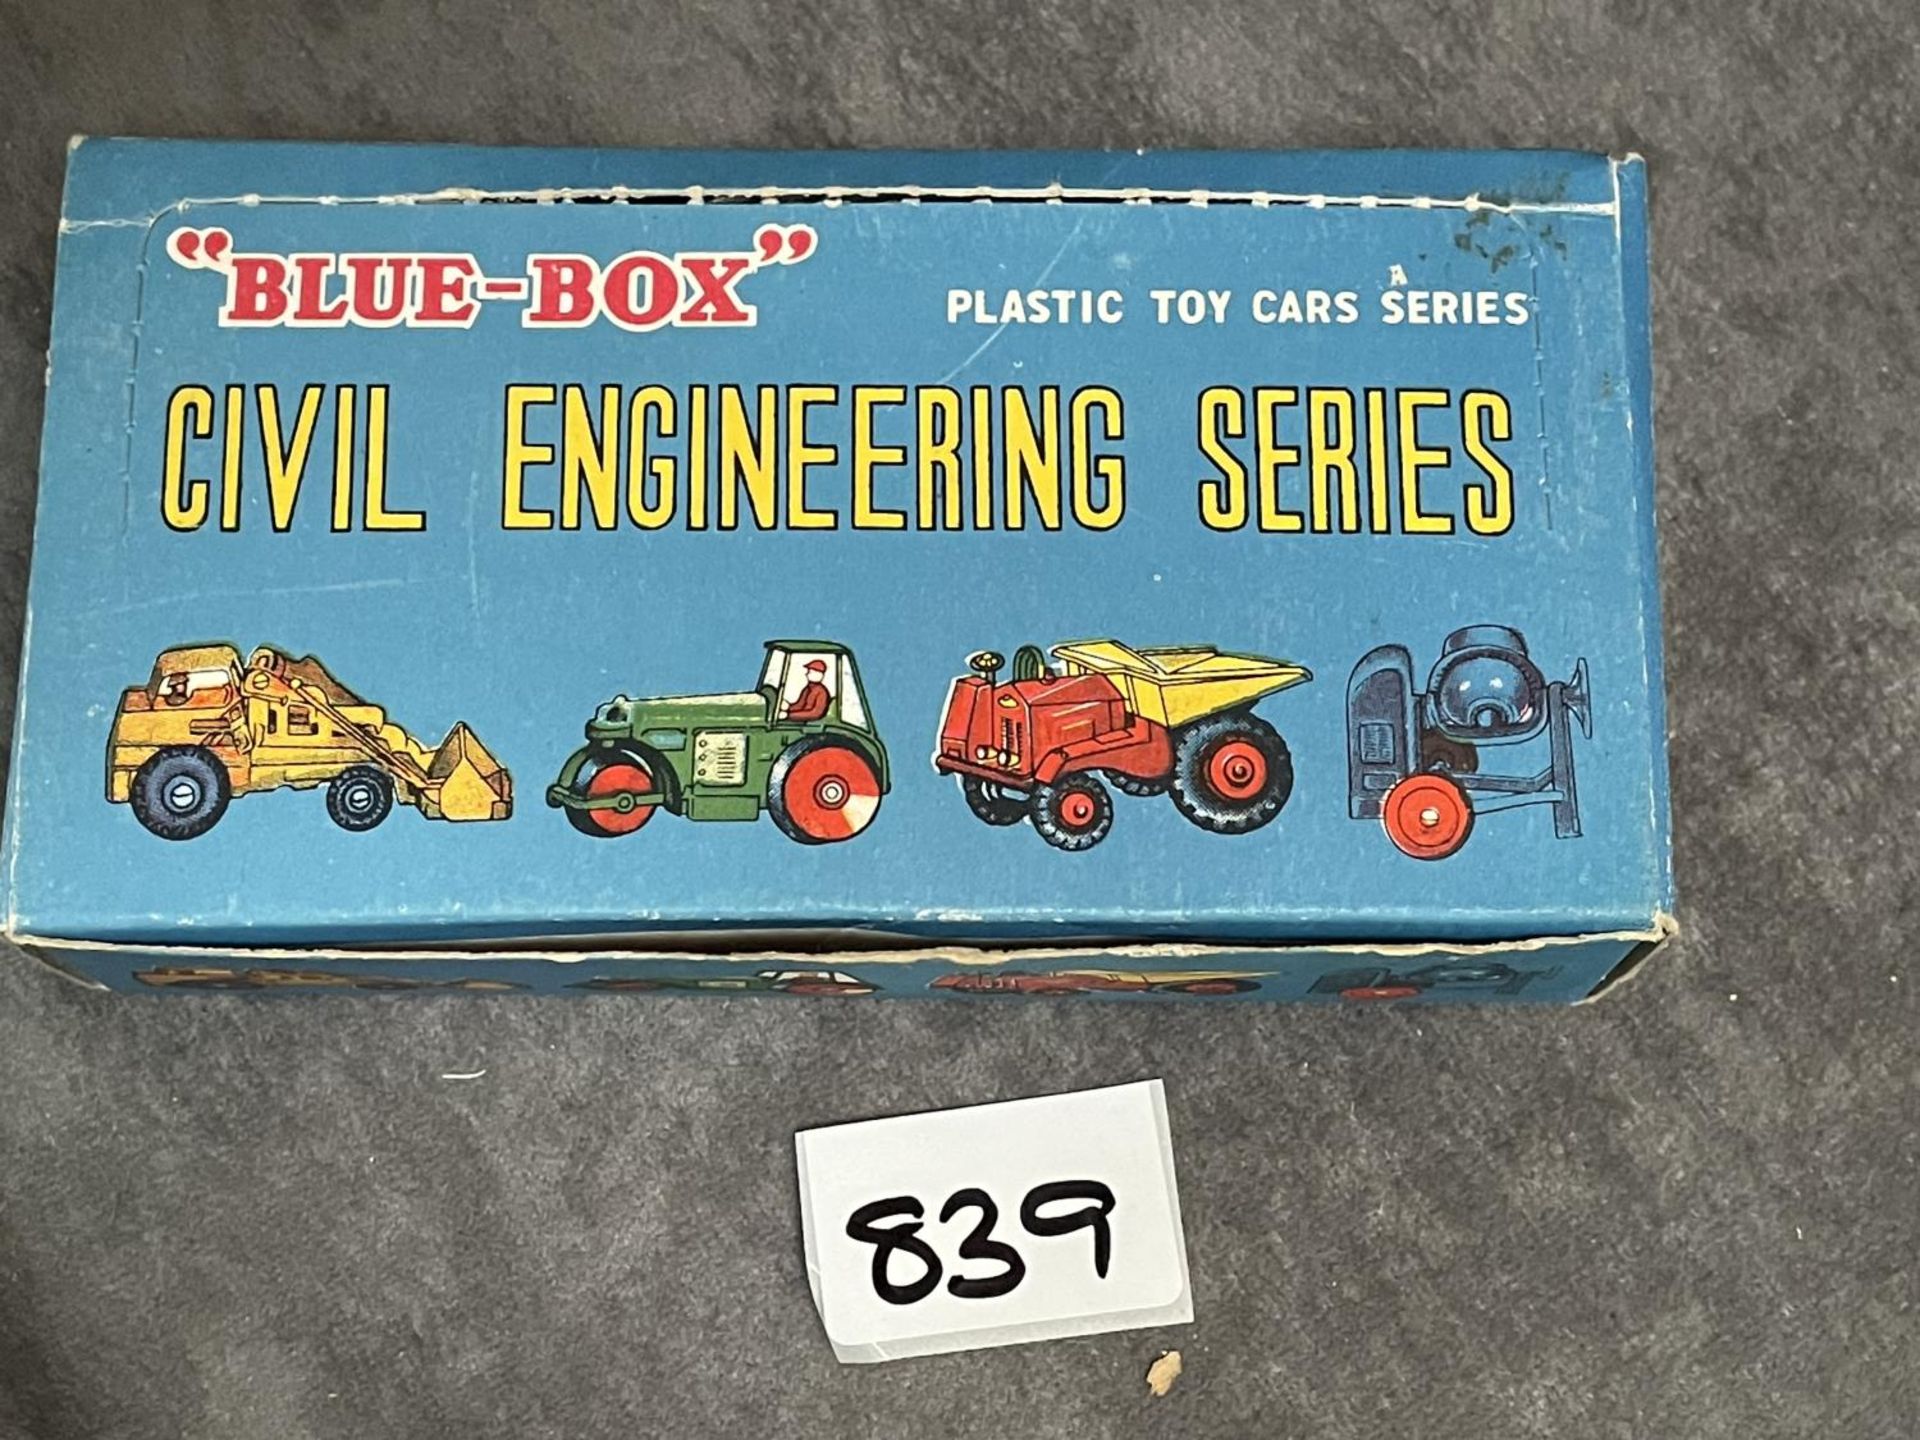 Blue Box Plastic Toy Cars No. 7404 Civil Engineering Series With 4 Vehicles In Box. Made In Hong